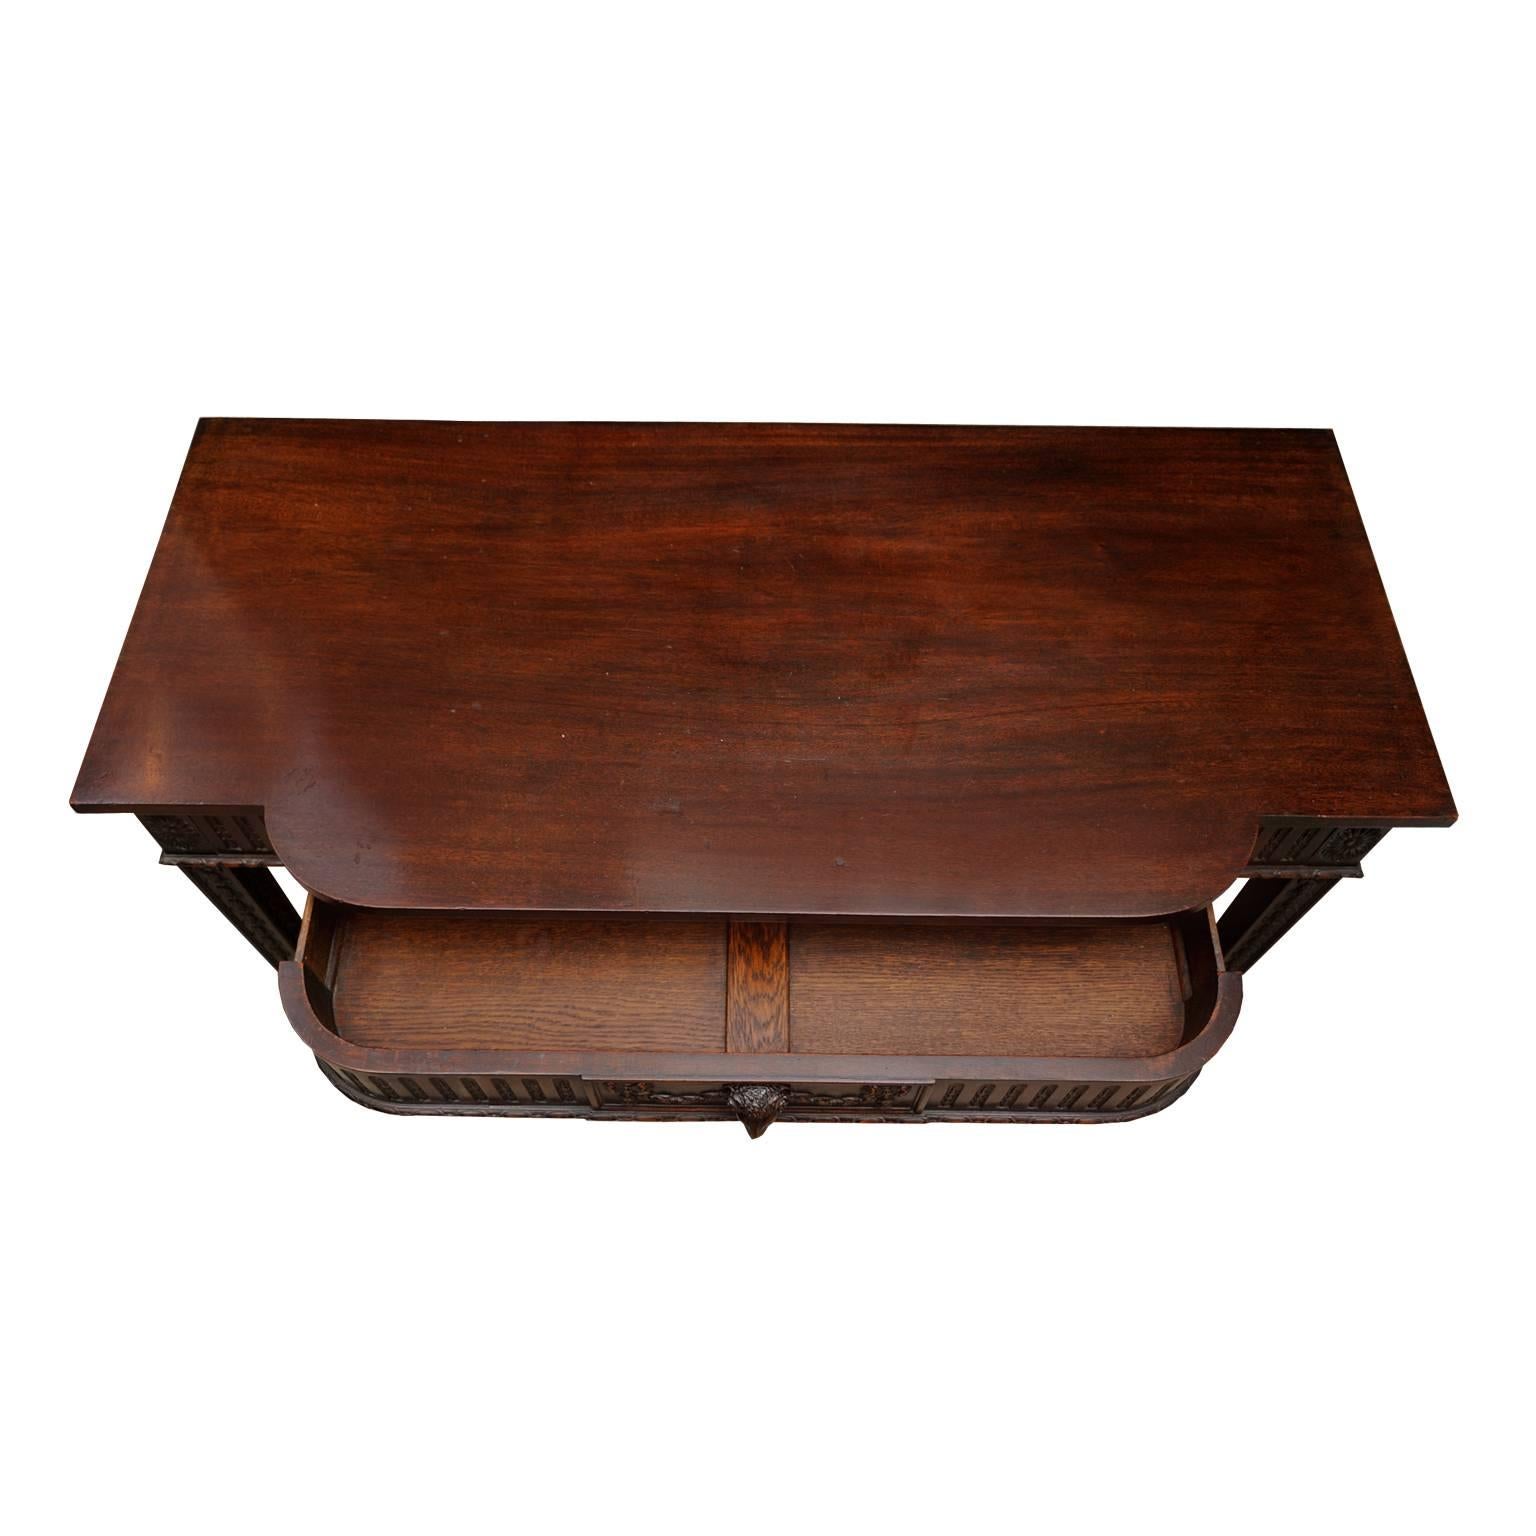 High Victorian Mid-18th Century Irish Style Mahogany Serving/Side Table, circa 1880 For Sale